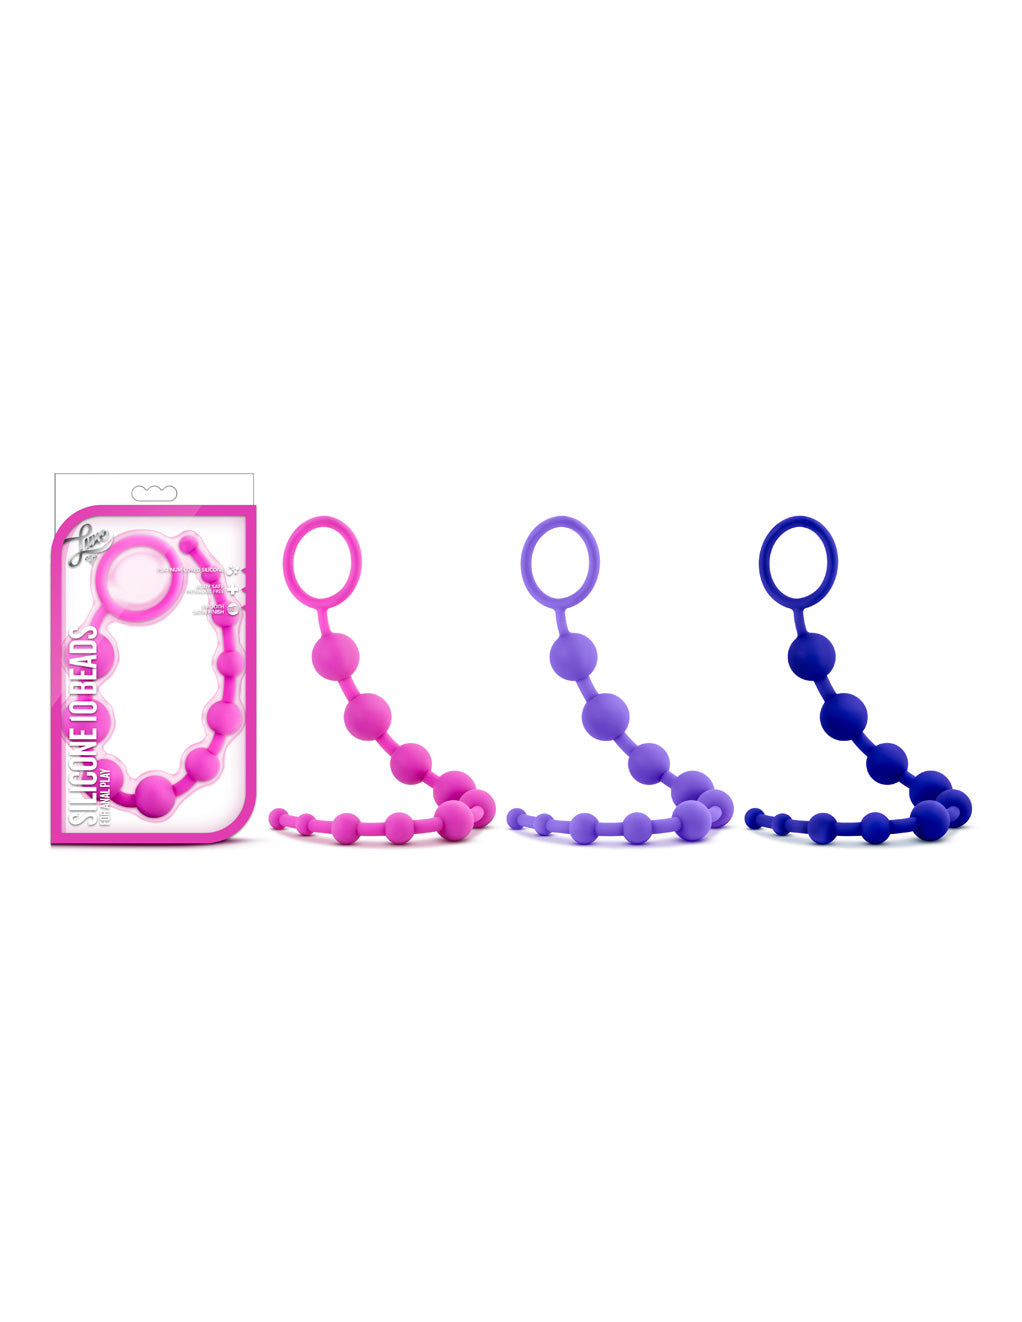 Luxe Silicone 10 Anal Beads- All colors